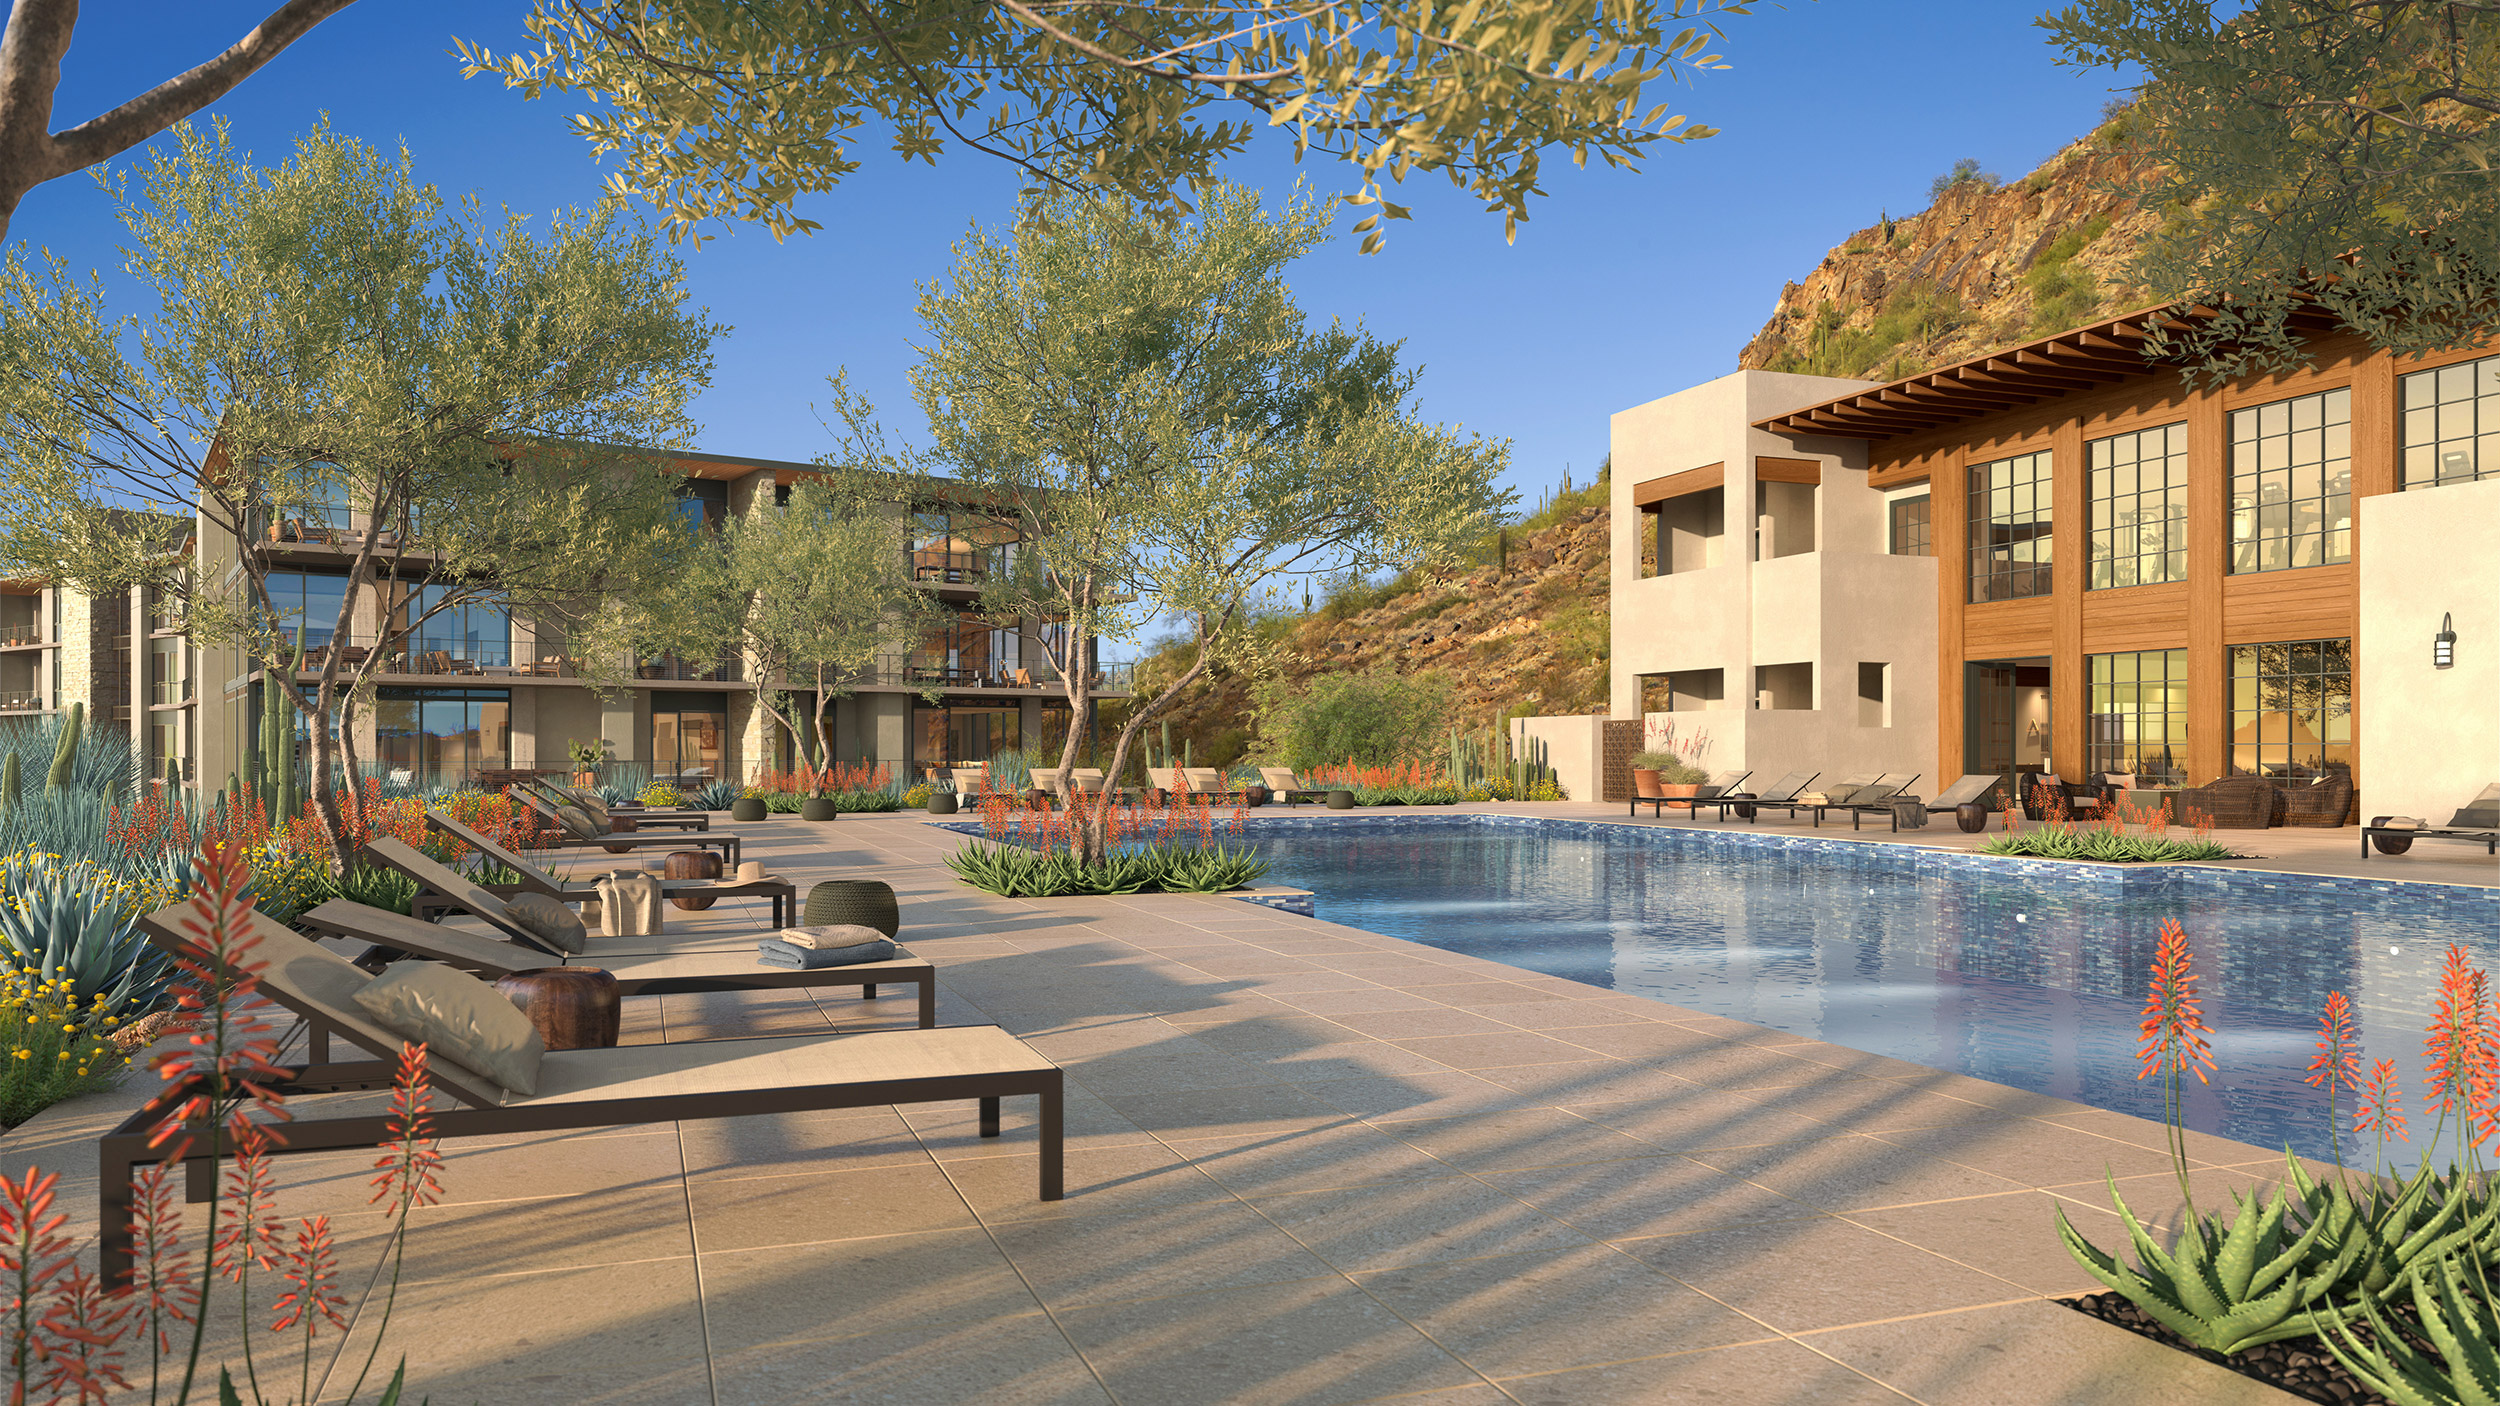 The Mountain Club – a private club that celebrates the iconic Camelback Mountain.